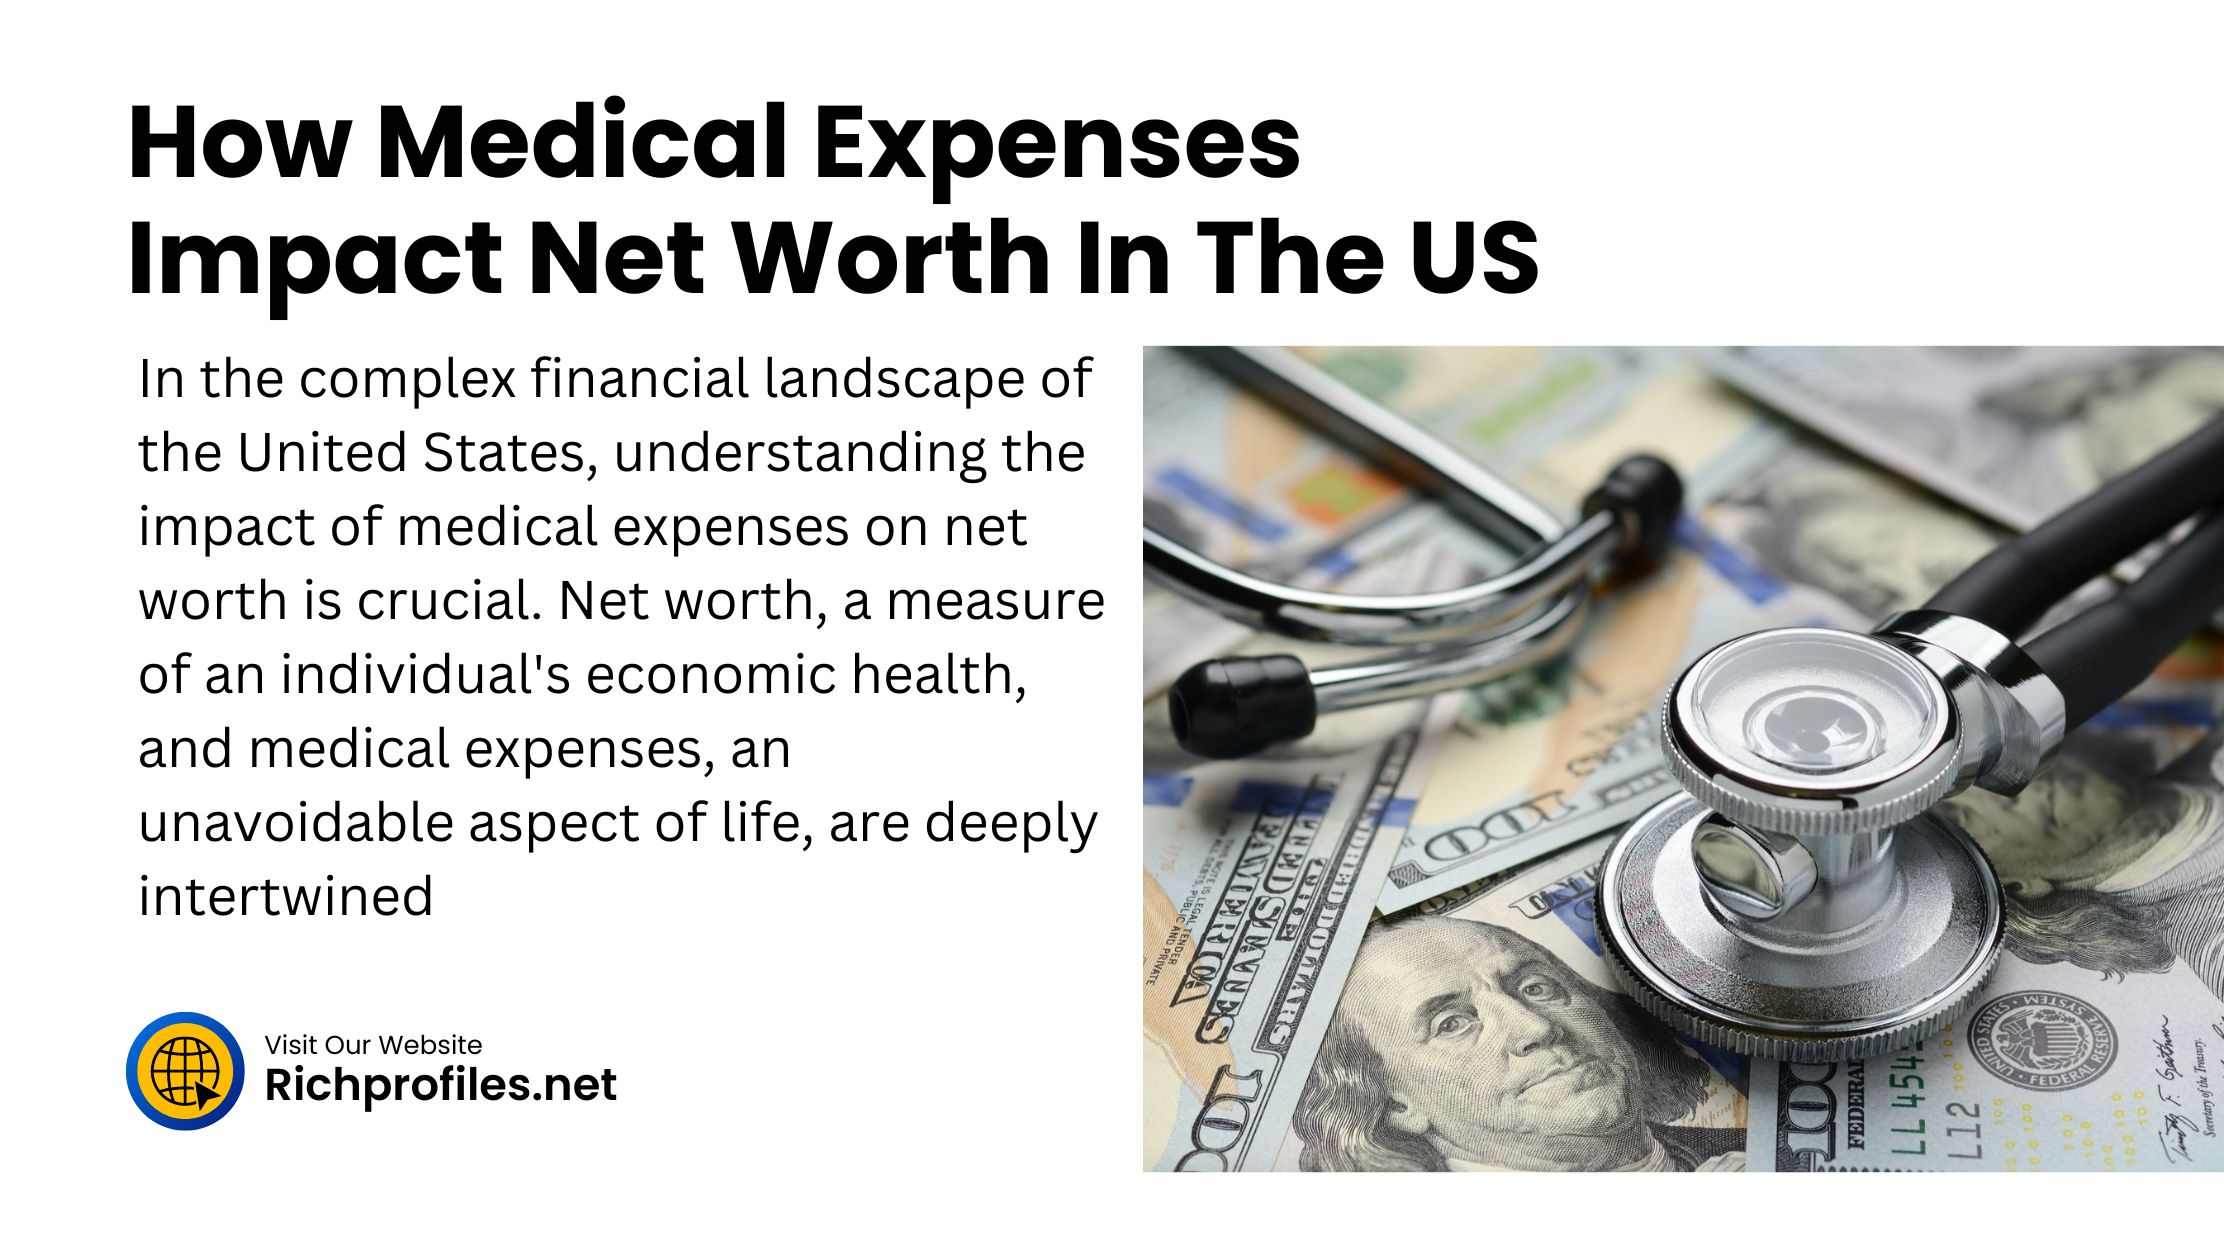 How Medical Expenses Impact Net Worth In The US